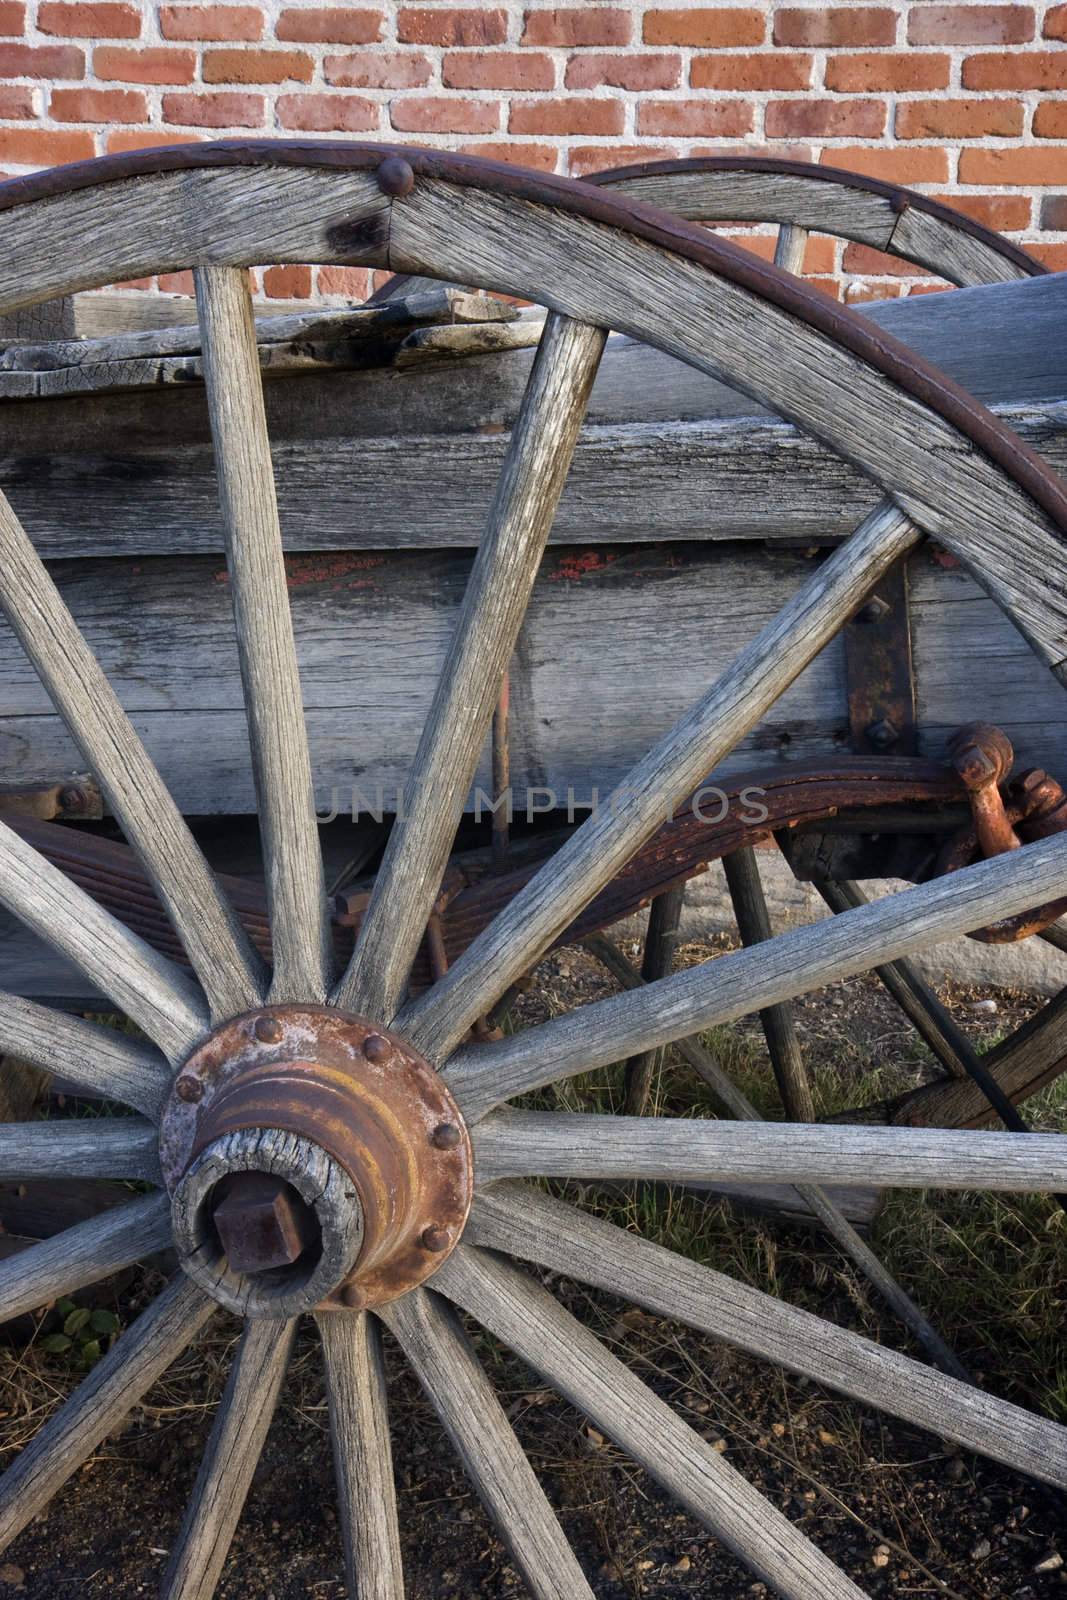 detail of an old wagon with wooden wheels againts brick wall